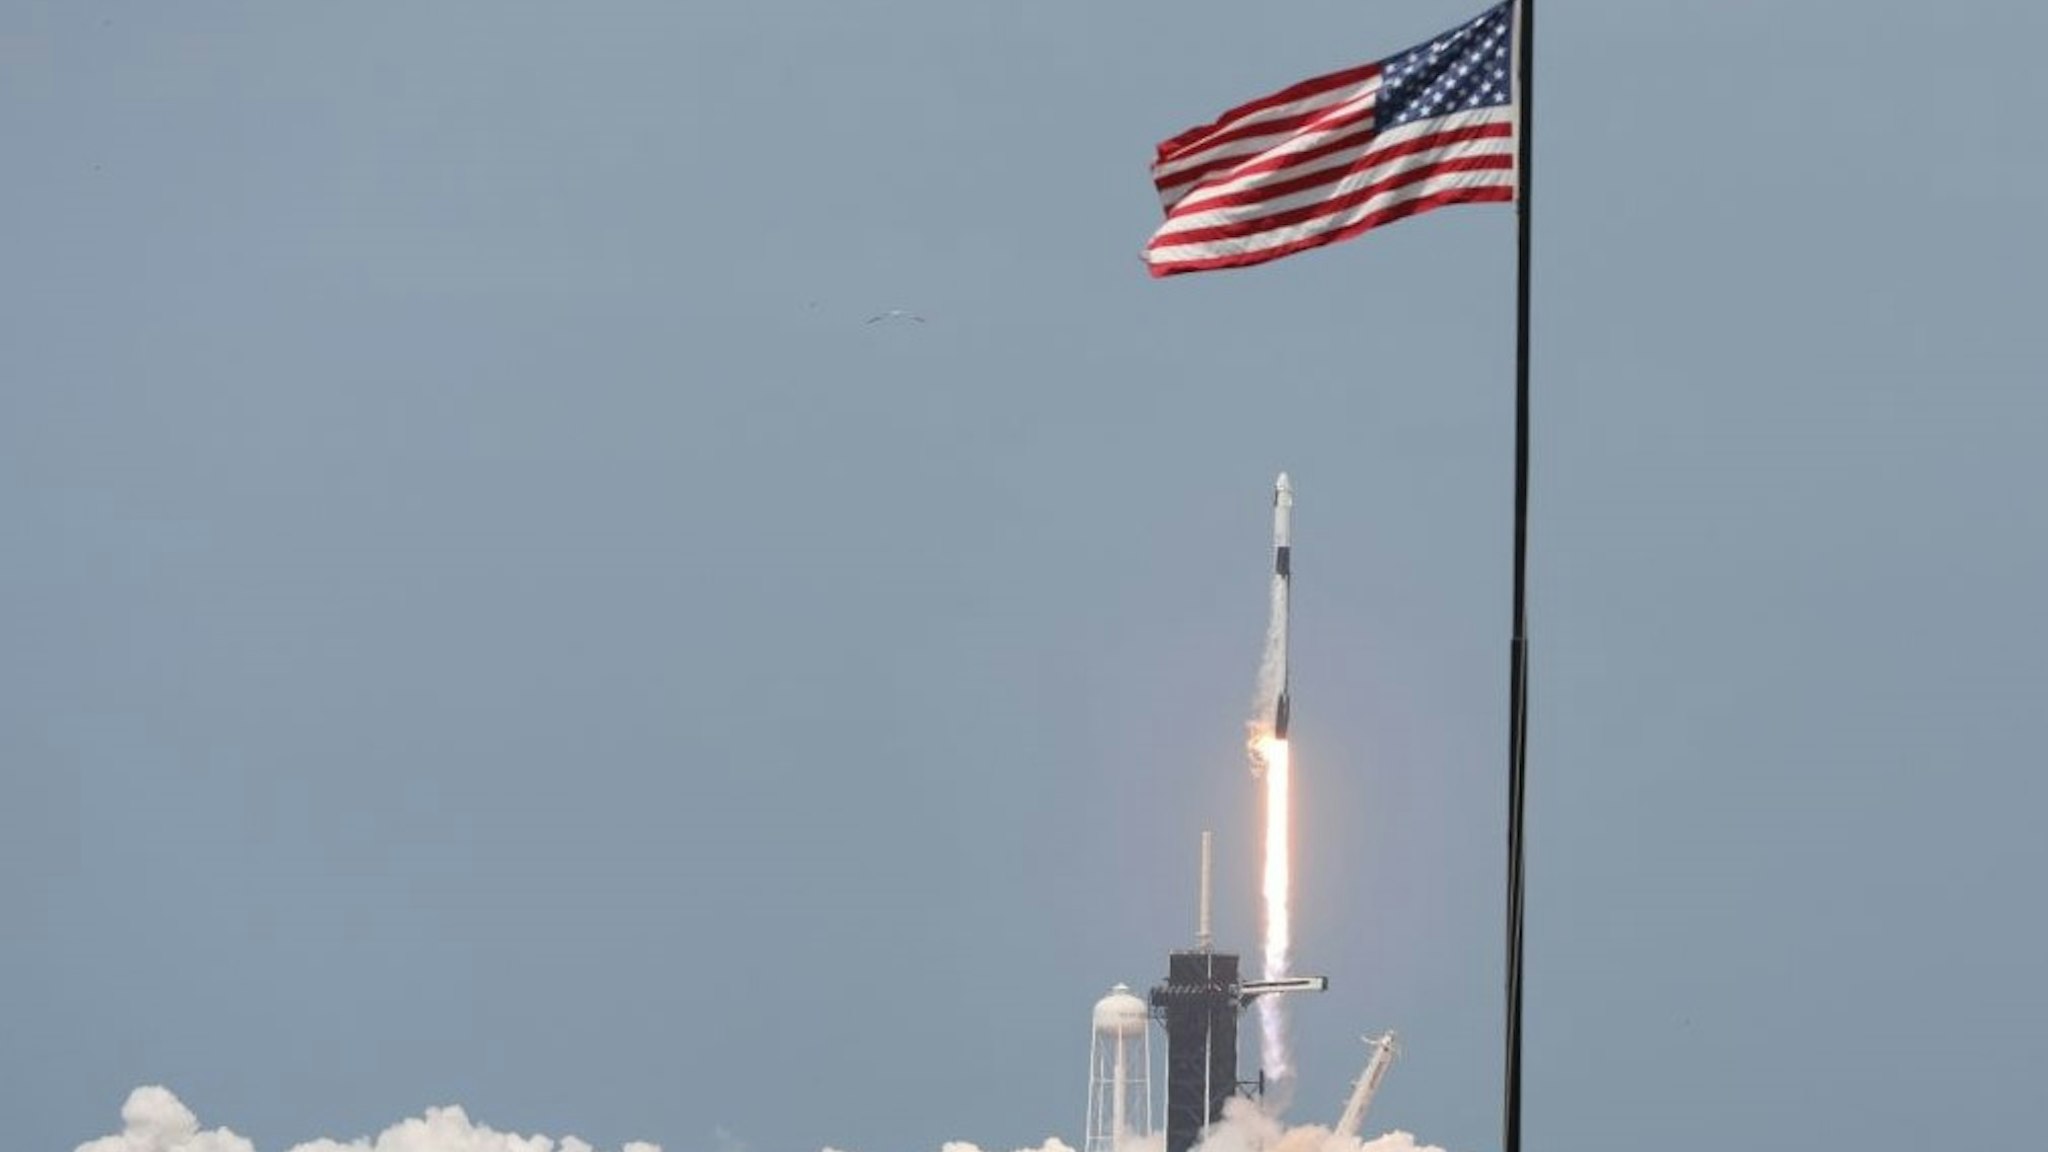 A SpaceX Falcon 9 rocket carrying the Crew Dragon spacecraft lifts off from launch complex 39A at the Kennedy Space Center in Florida on May 30, 2020. - NASA astronauts Hurley and Bob Behnken are set to depart for an extended stay at the International Space Station on the SpaceX Demo-2 mission. (Photo by Gregg Newton / AFP) (Photo by